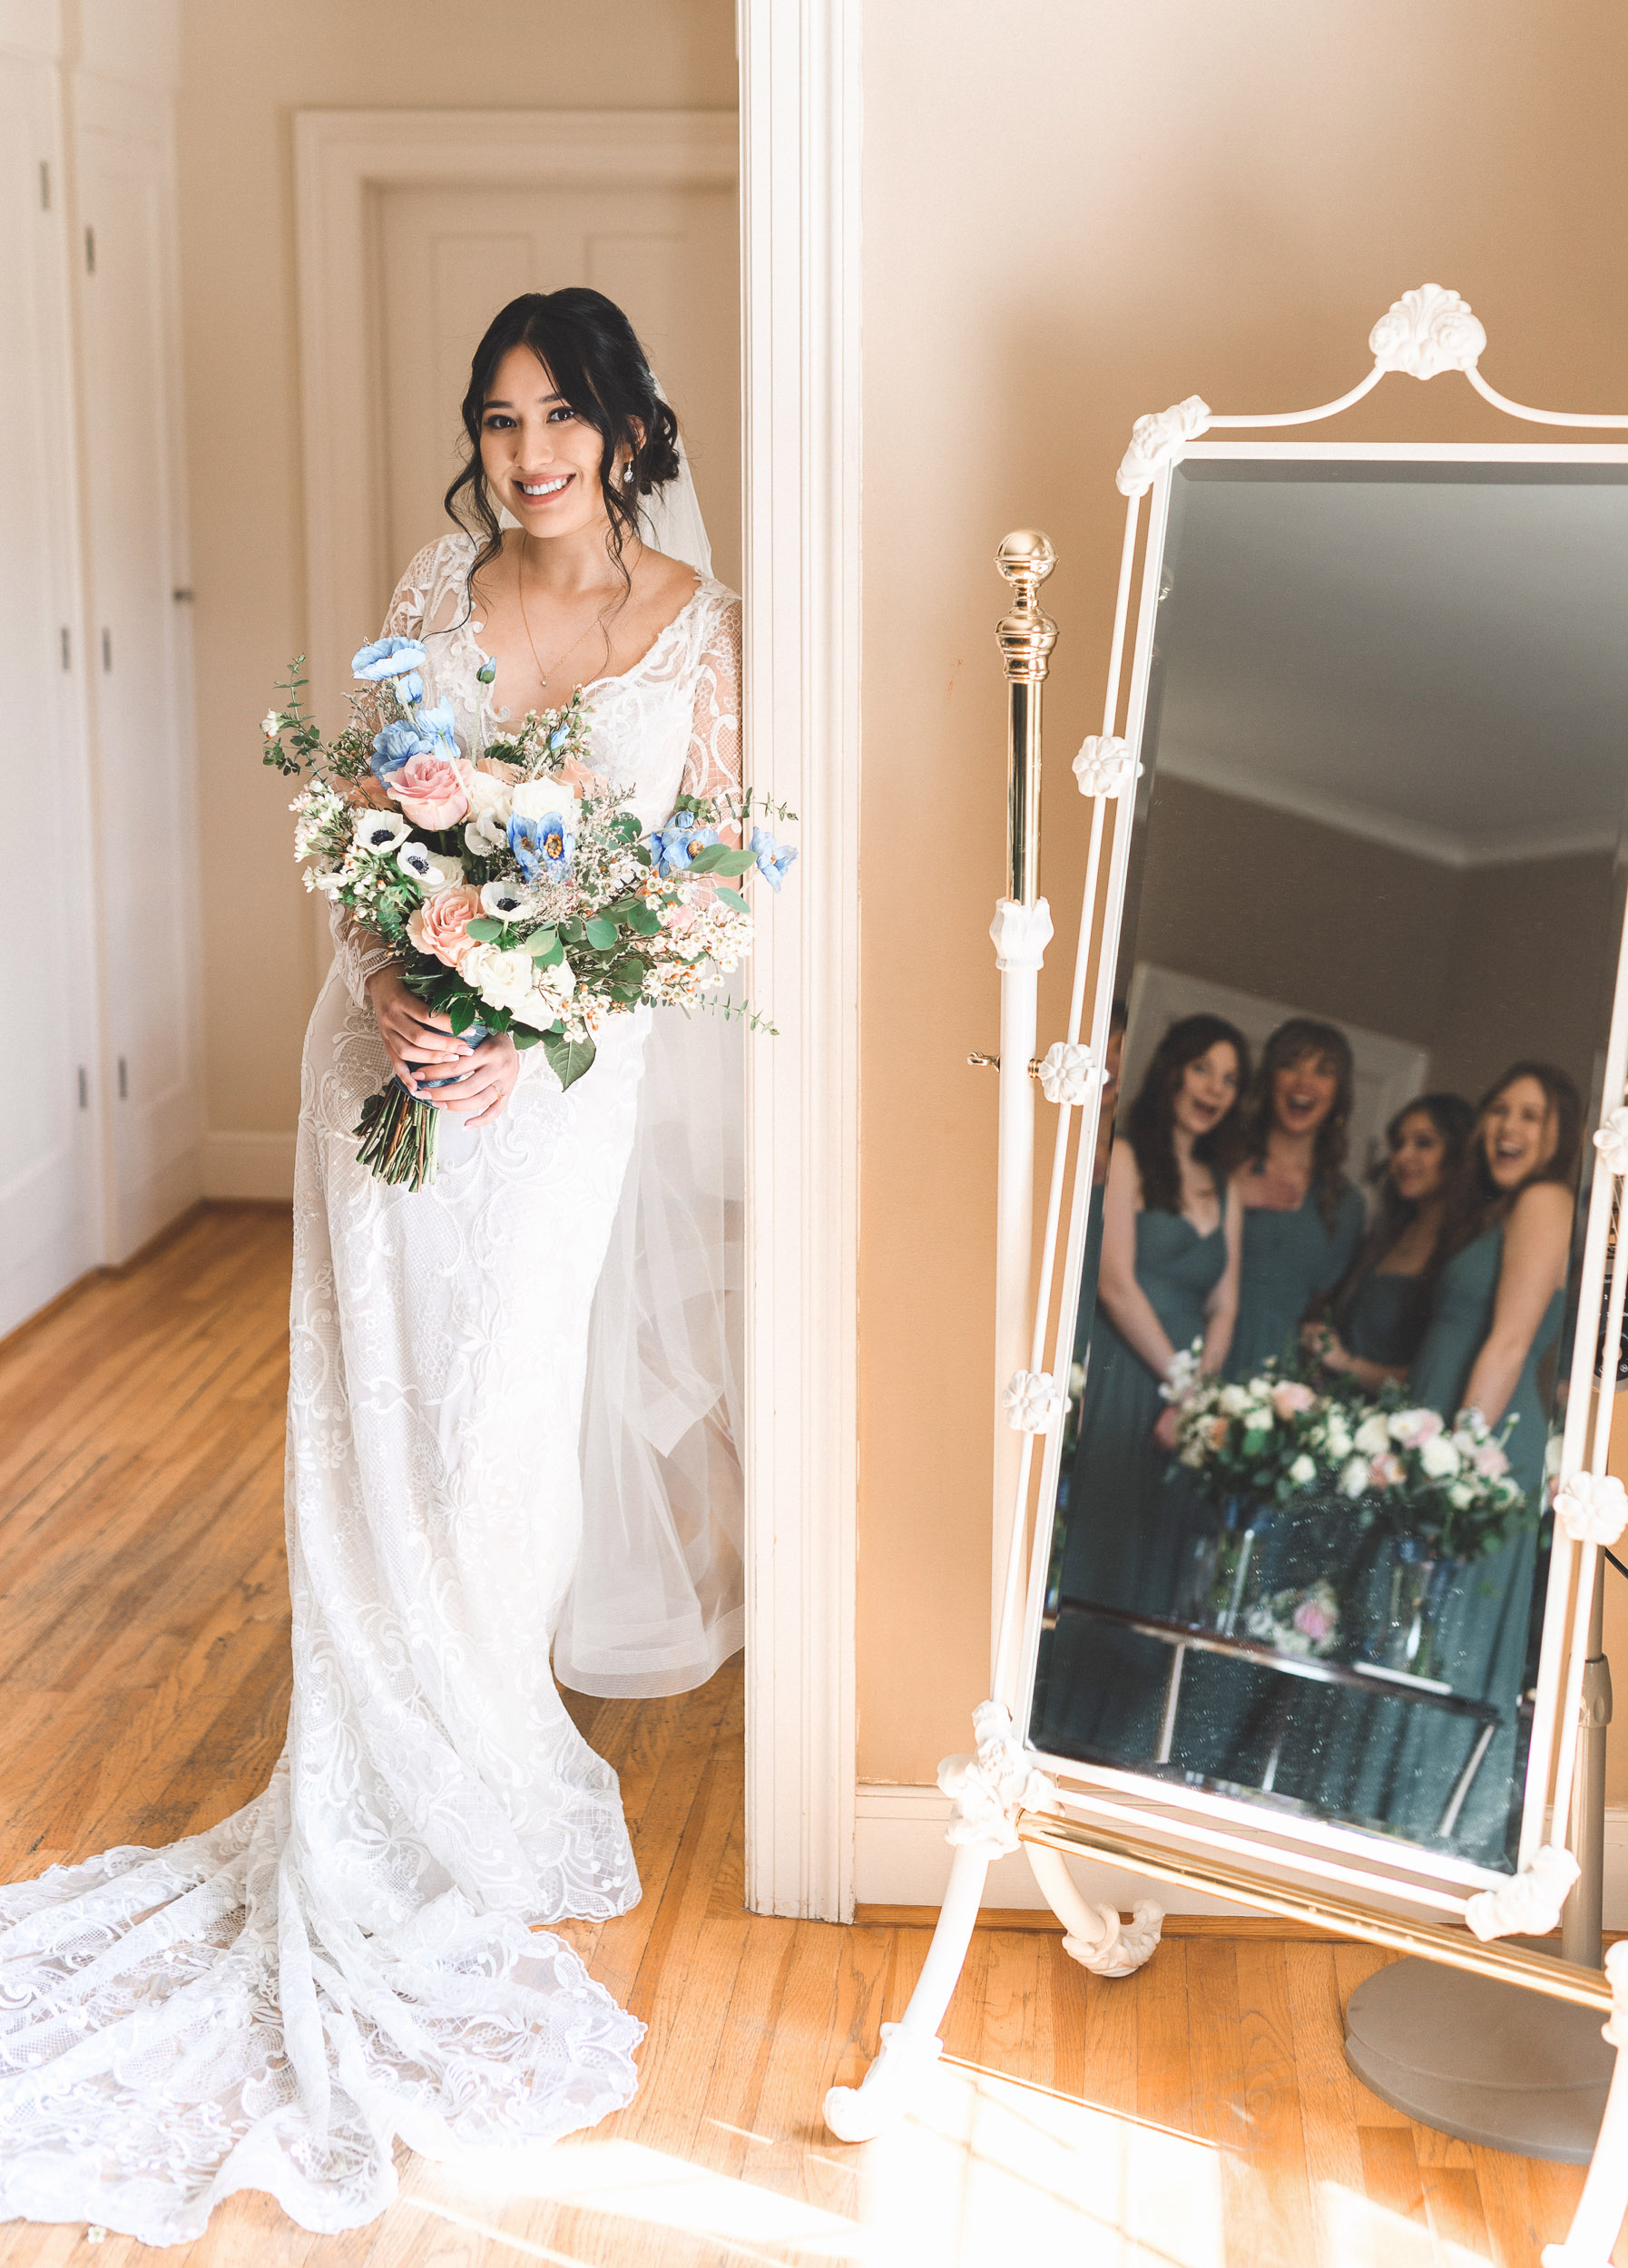 A bride and her bridesmaids standing in front of a mirror.